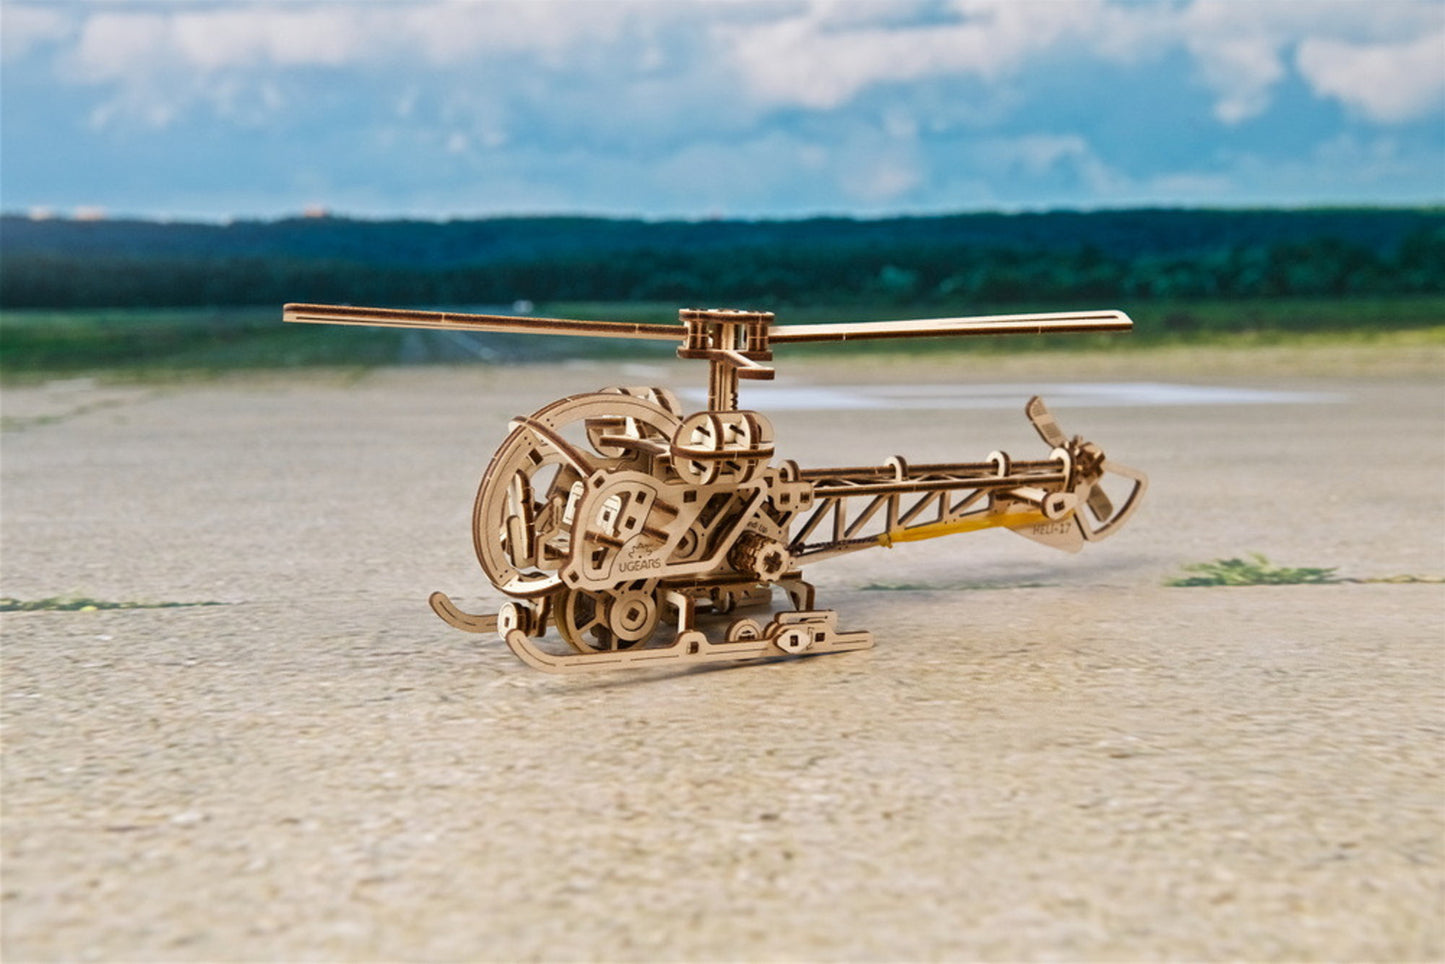 Mini Helicopter